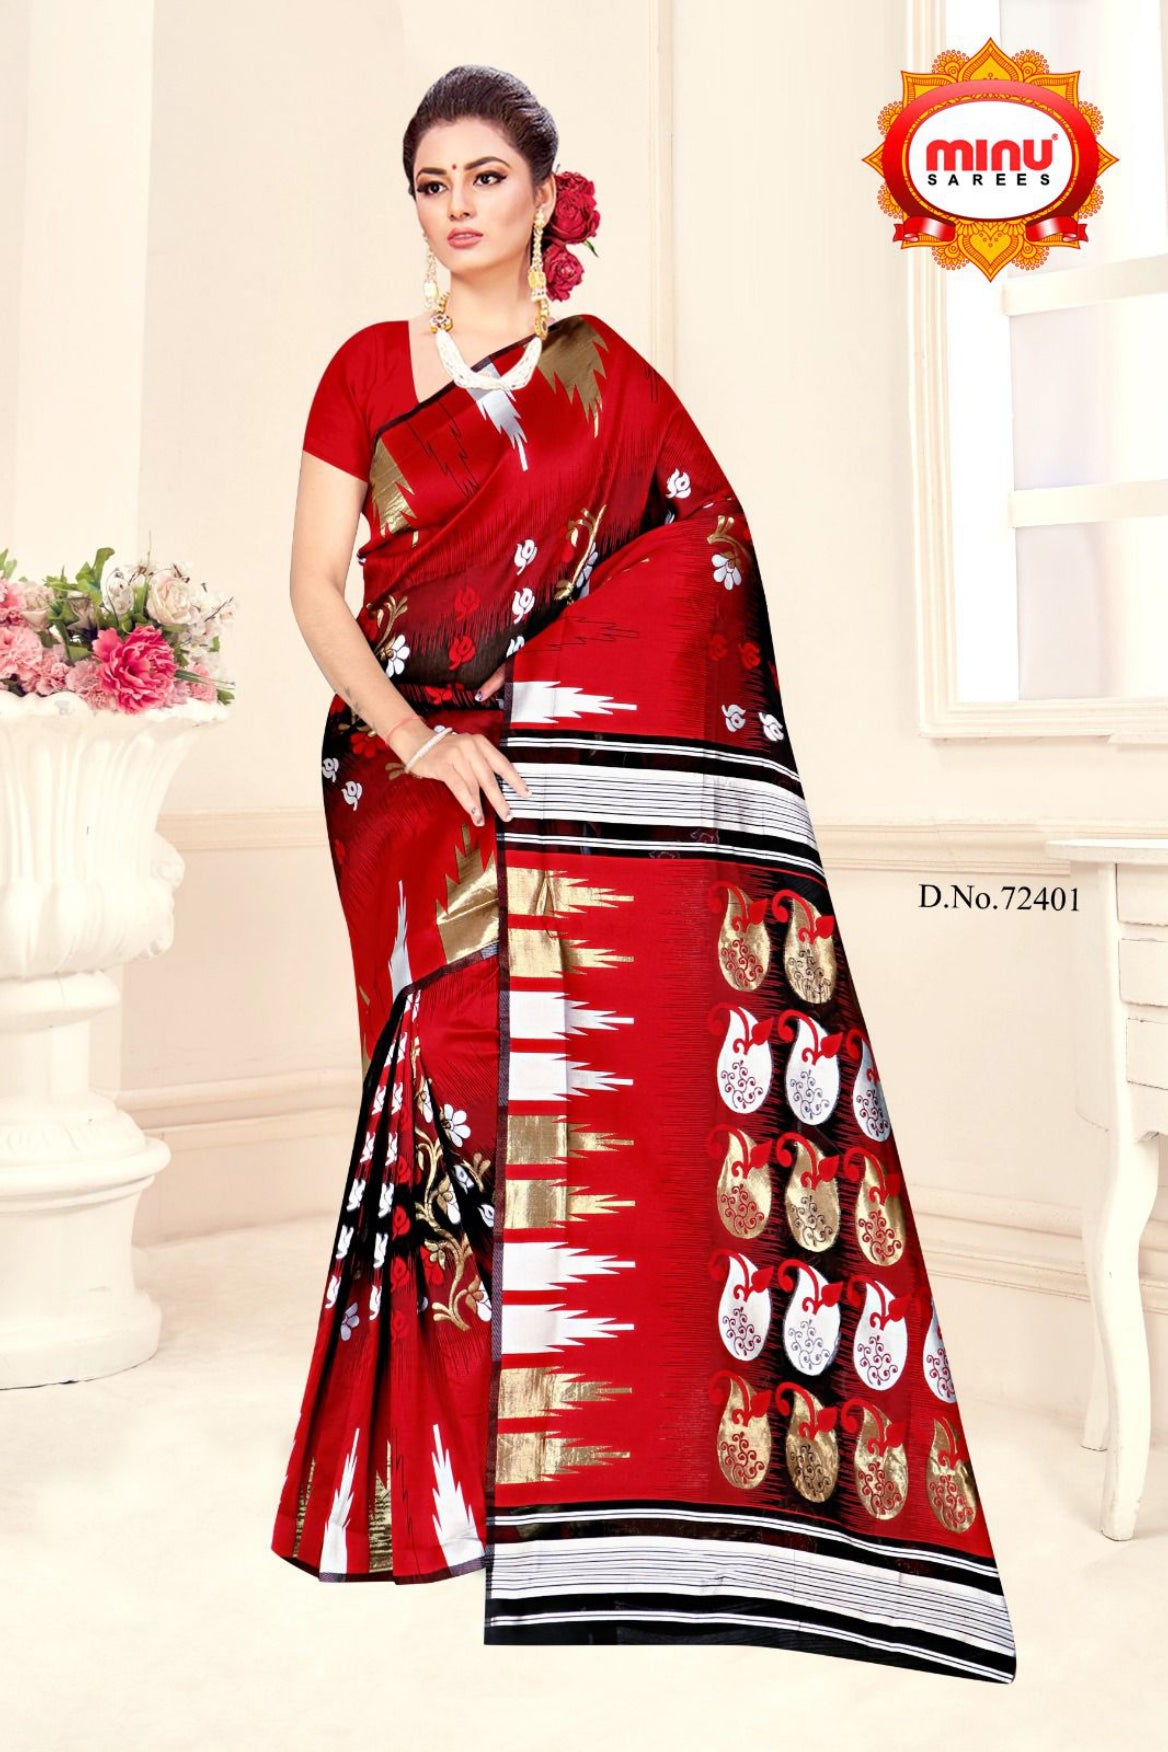 Woman wearing bold color fancy saree image